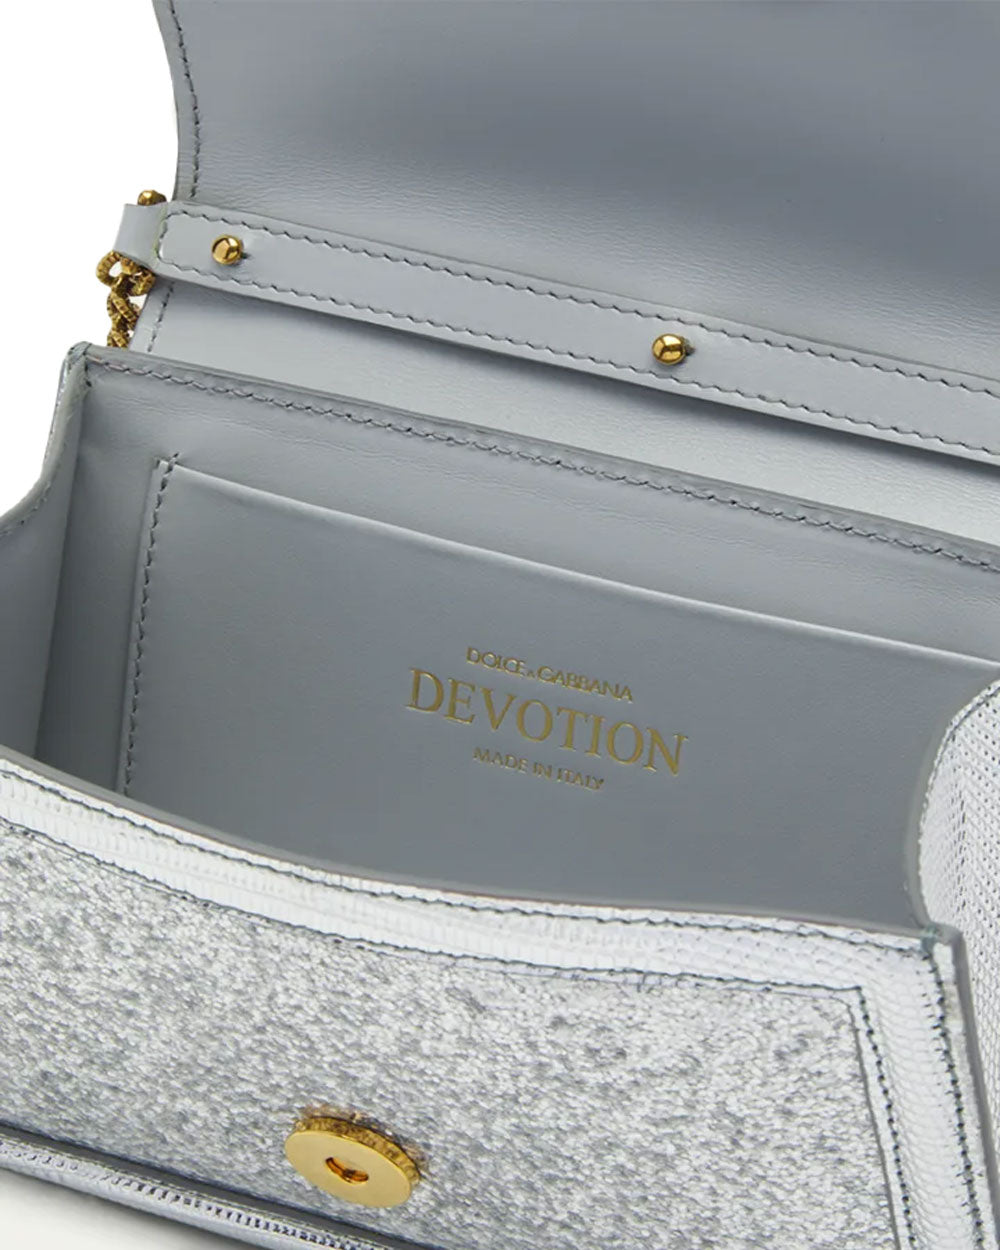 Small Devotion Top Handle Bag in Argento